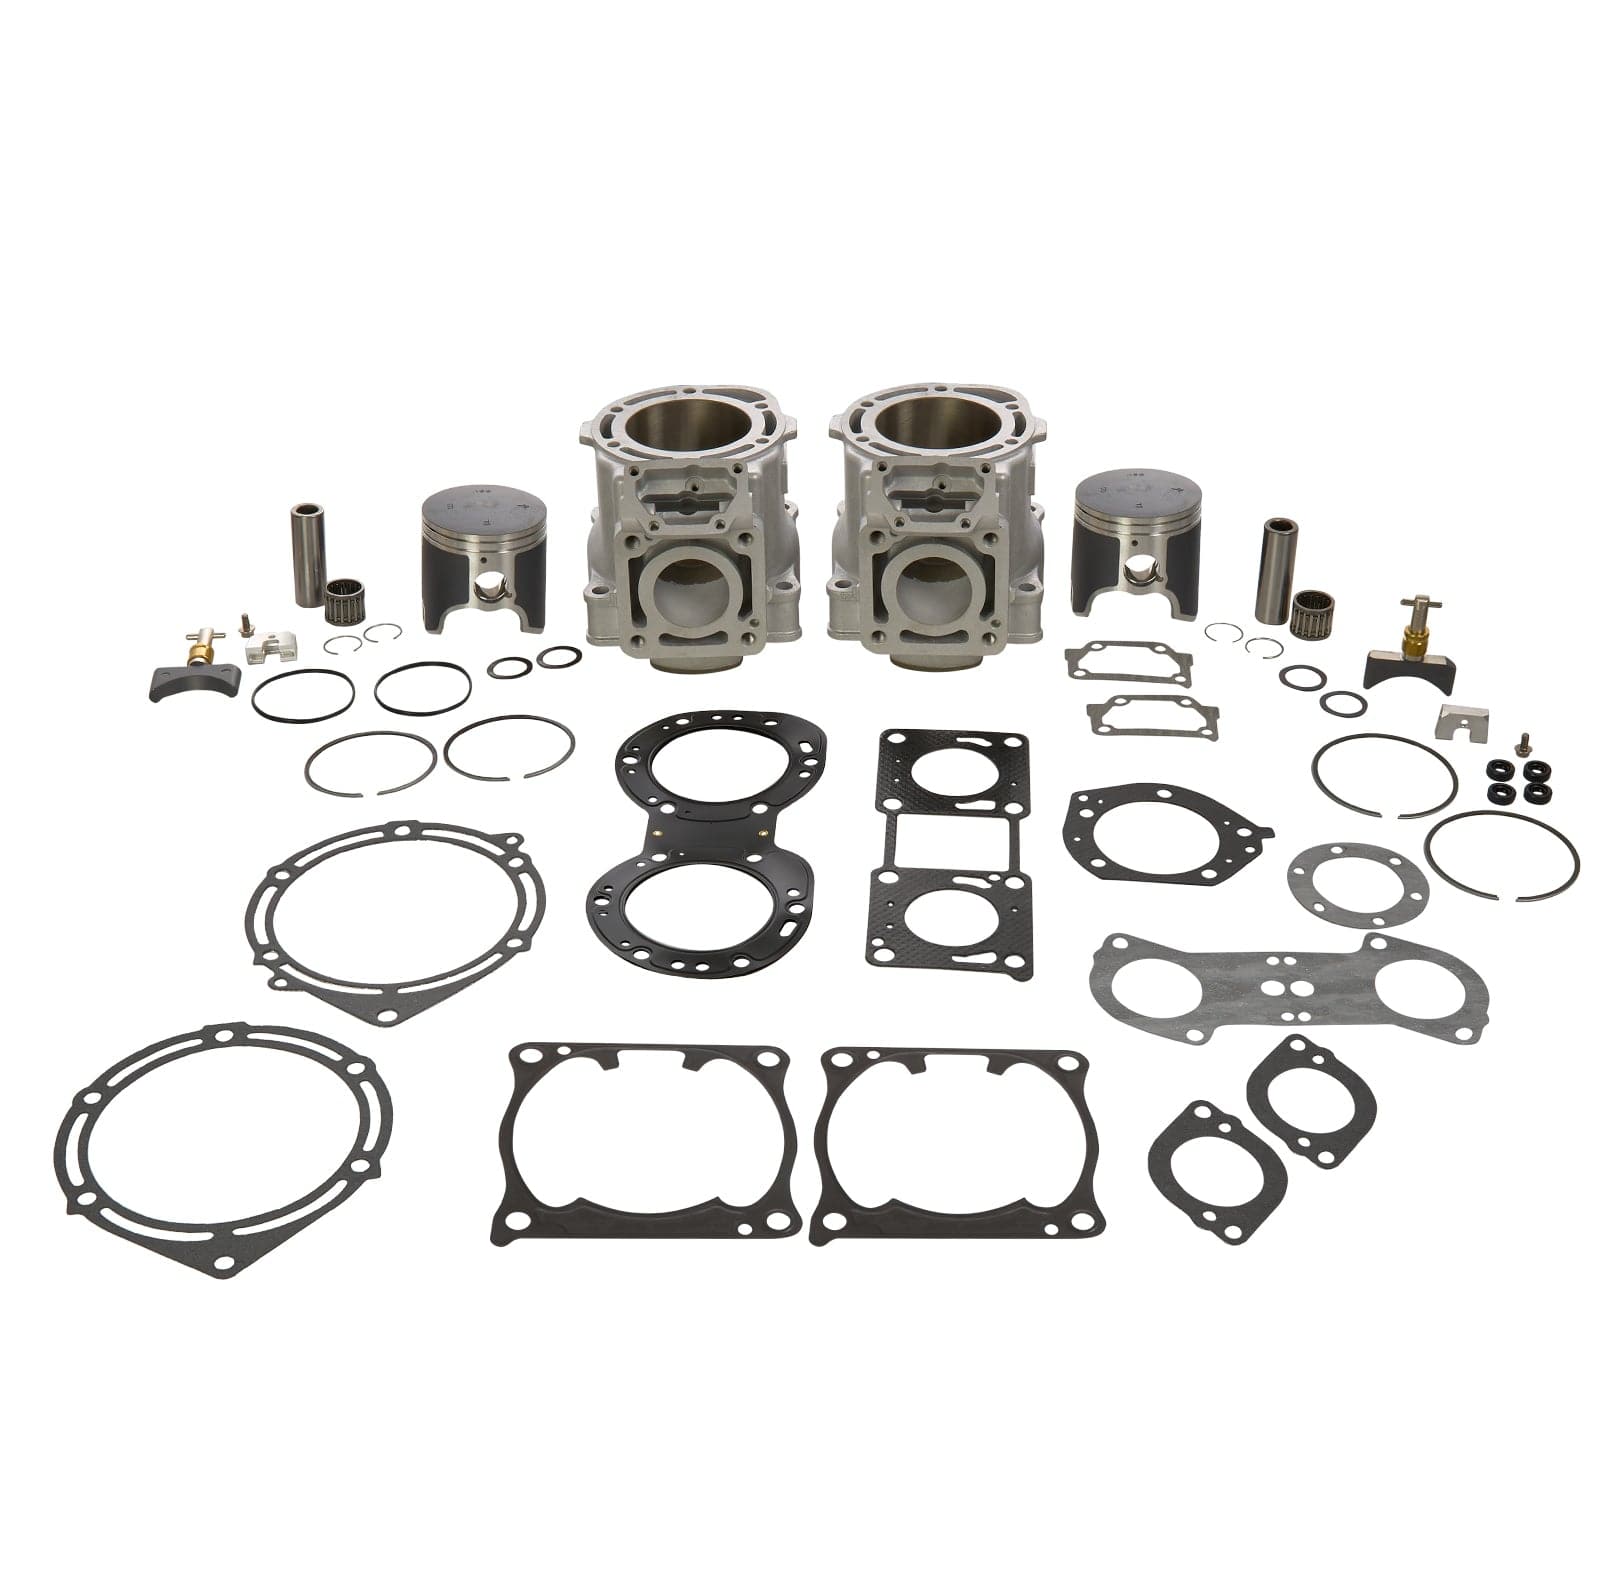 Cylinder Kits & Parts for Jet Skis | Watercraft Superstore